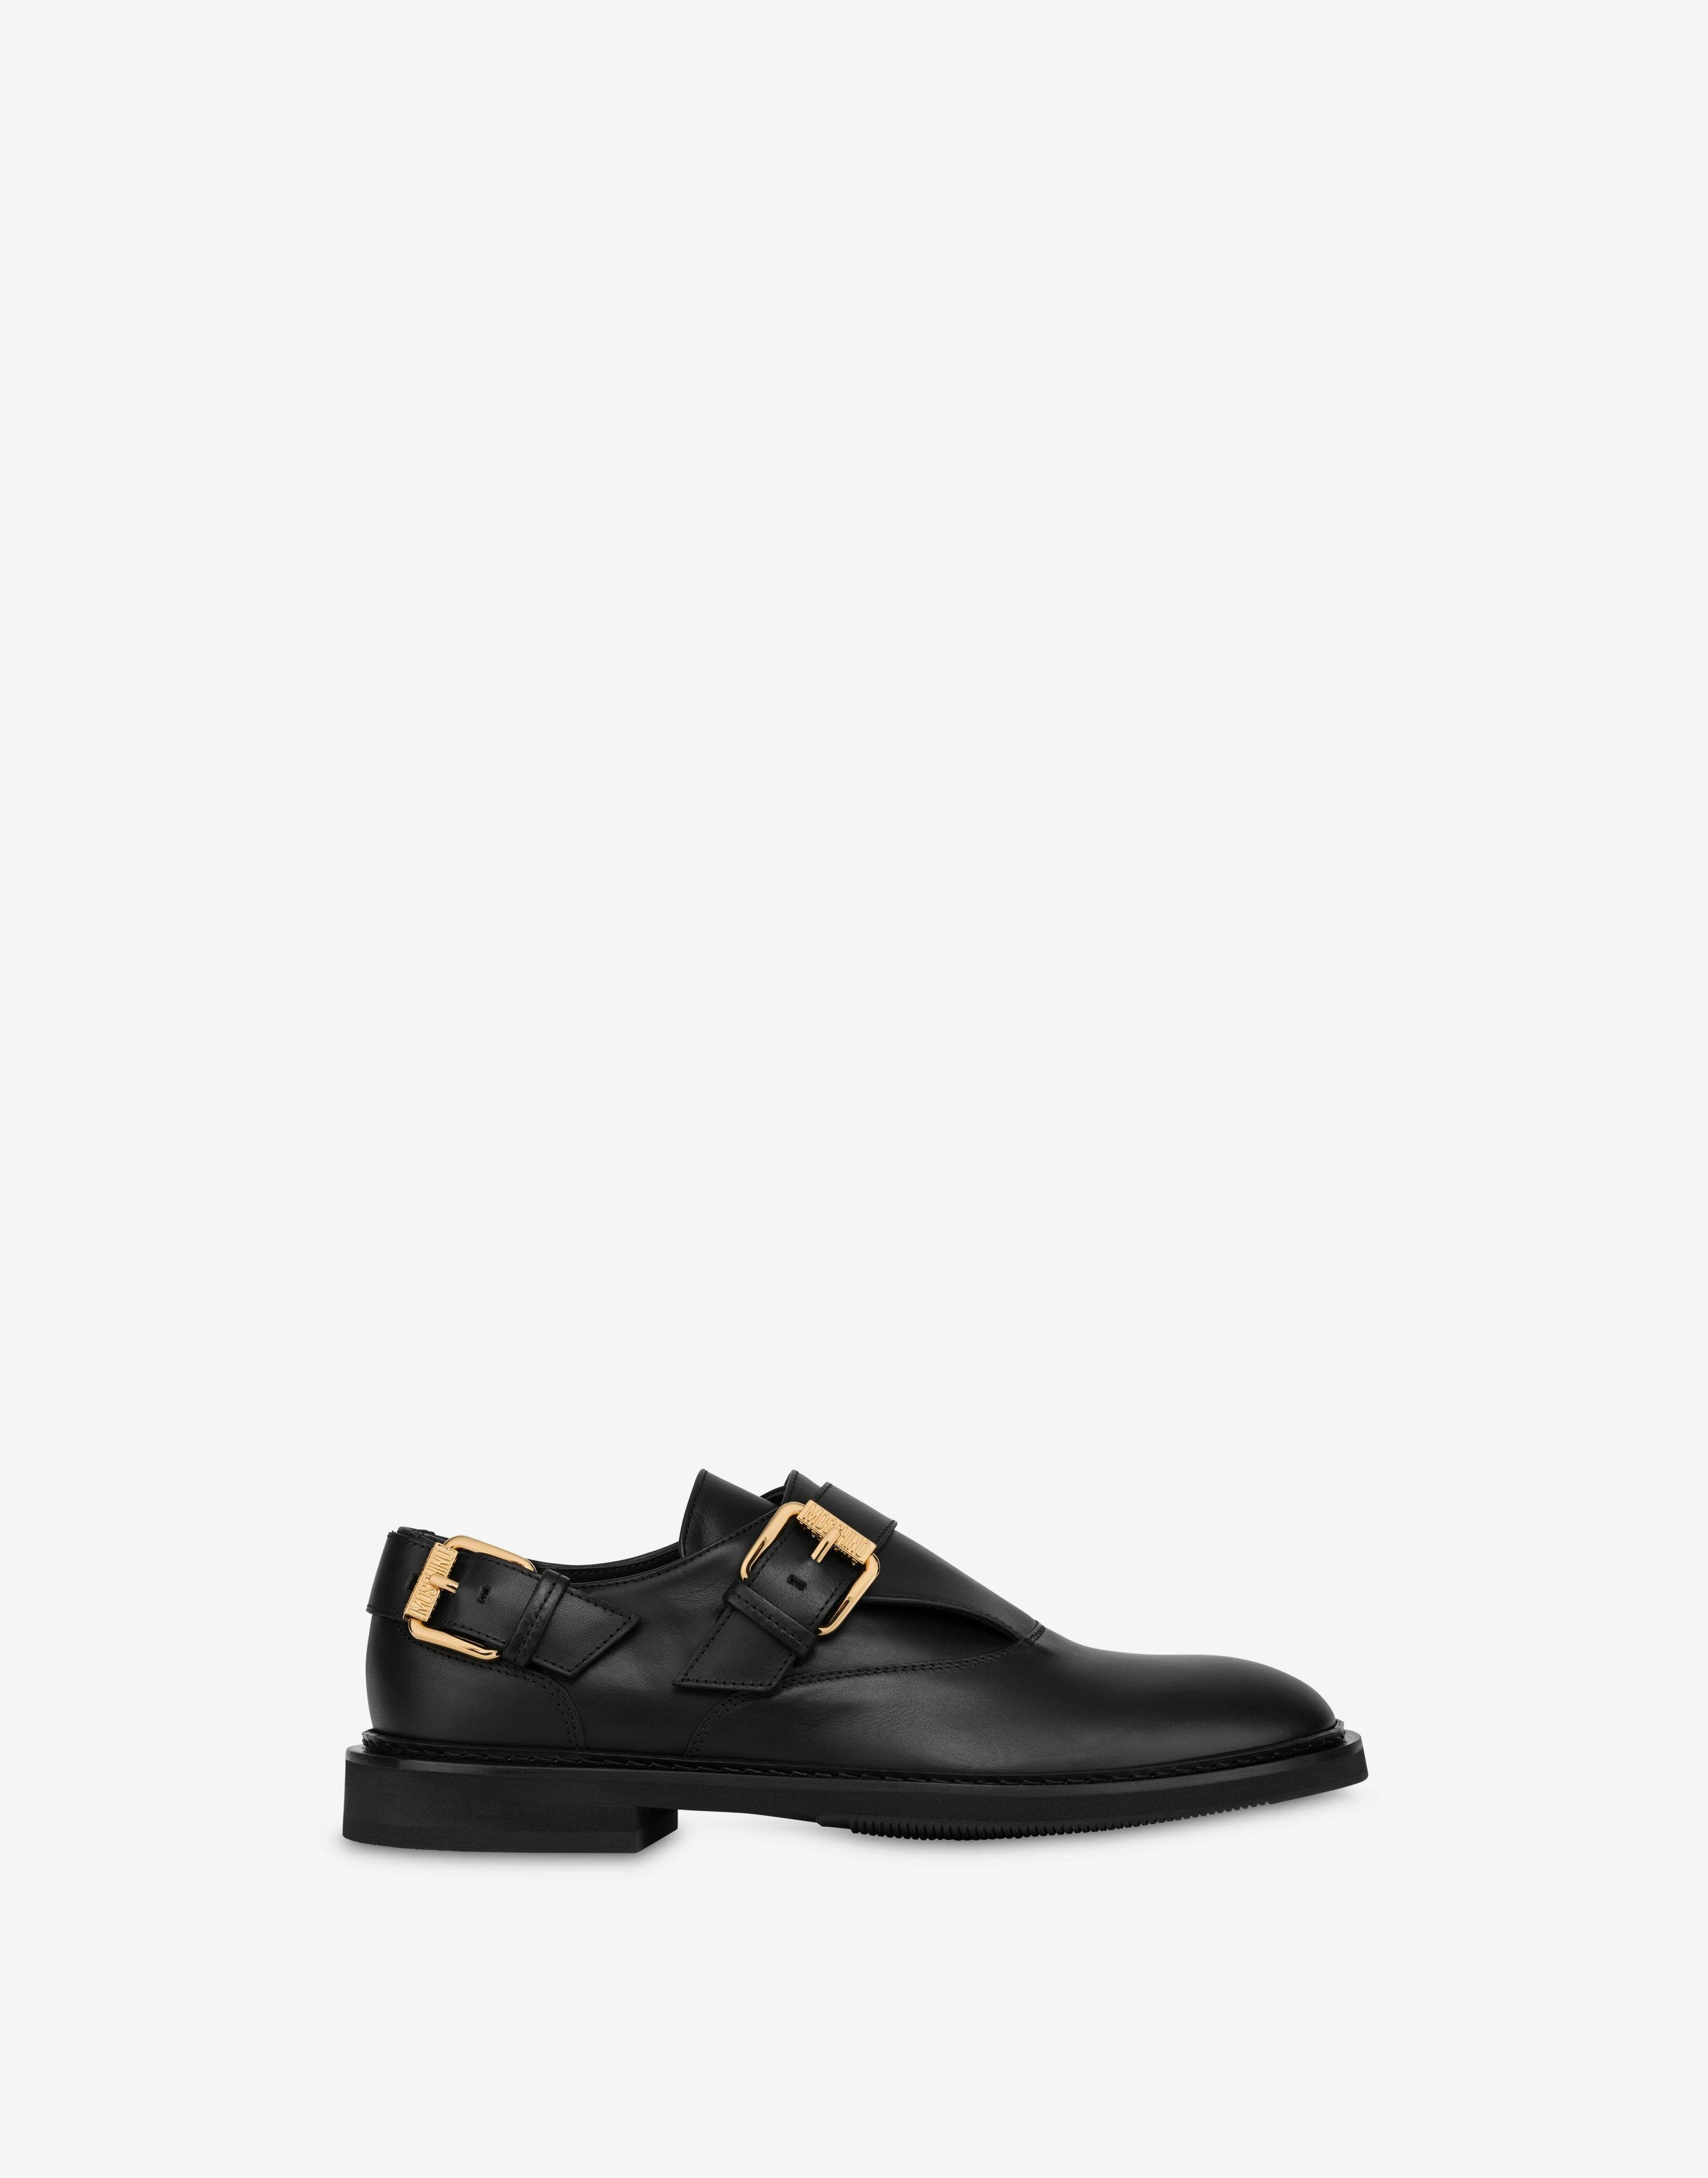 Double Buckle calfskin loafers